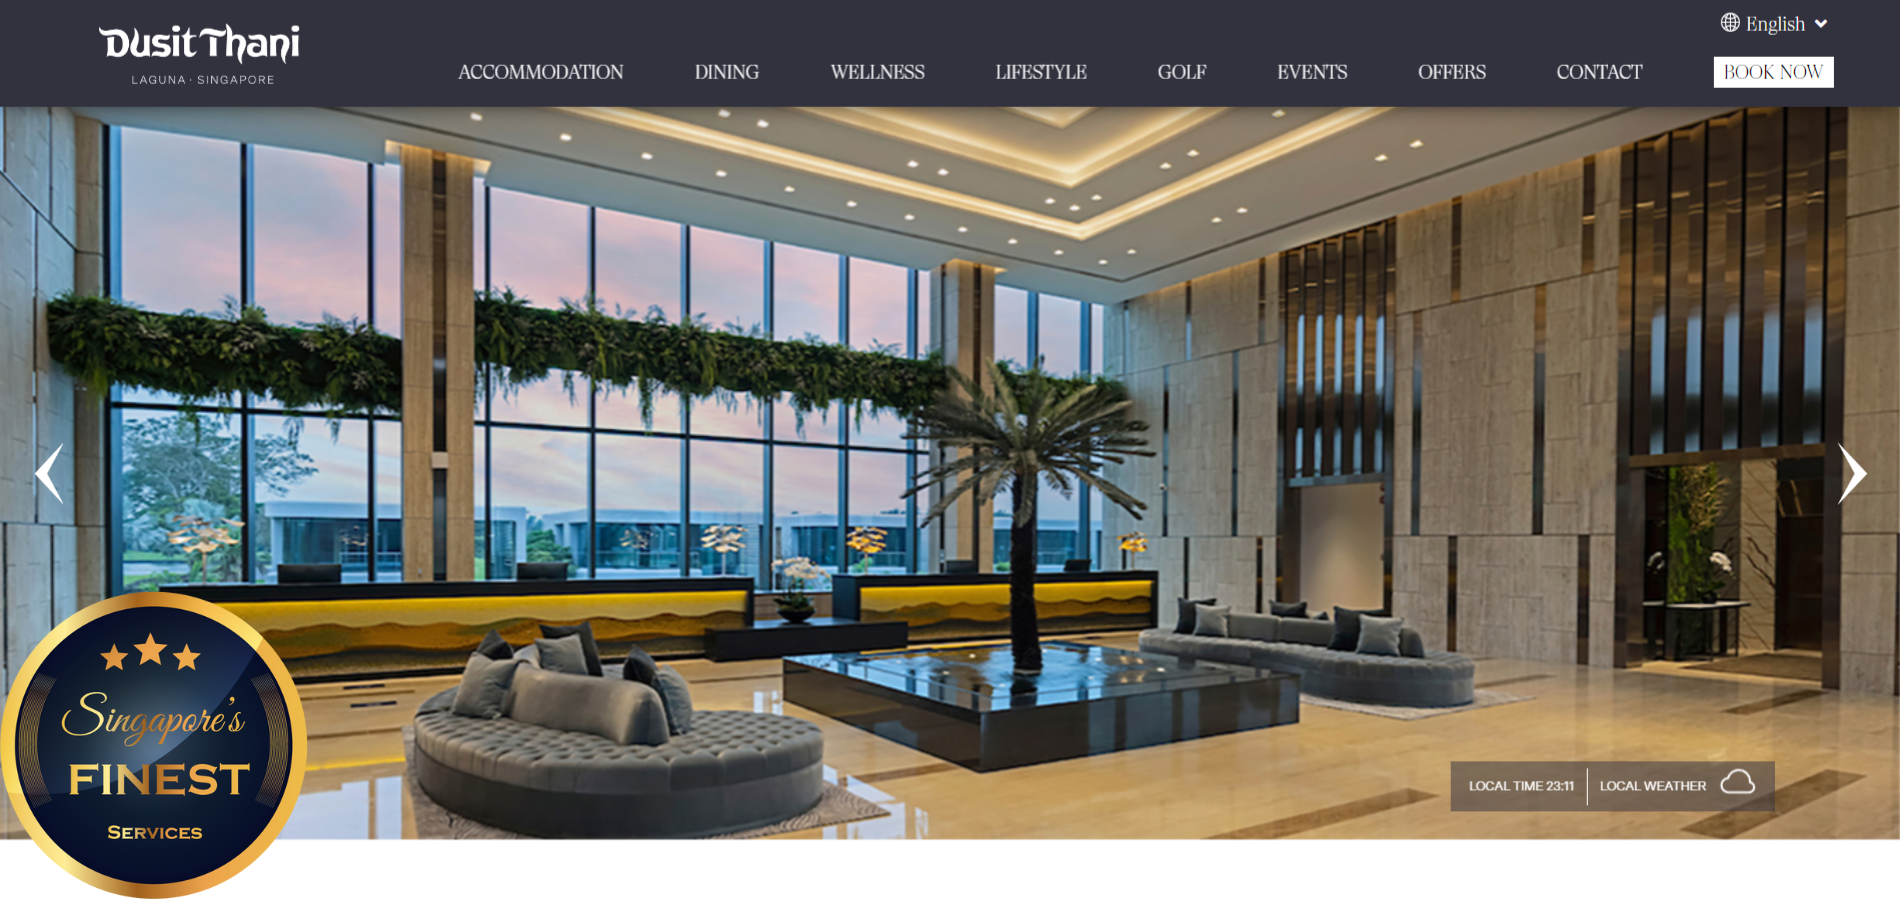 The Finest Hotels in Changi Airport Singapore